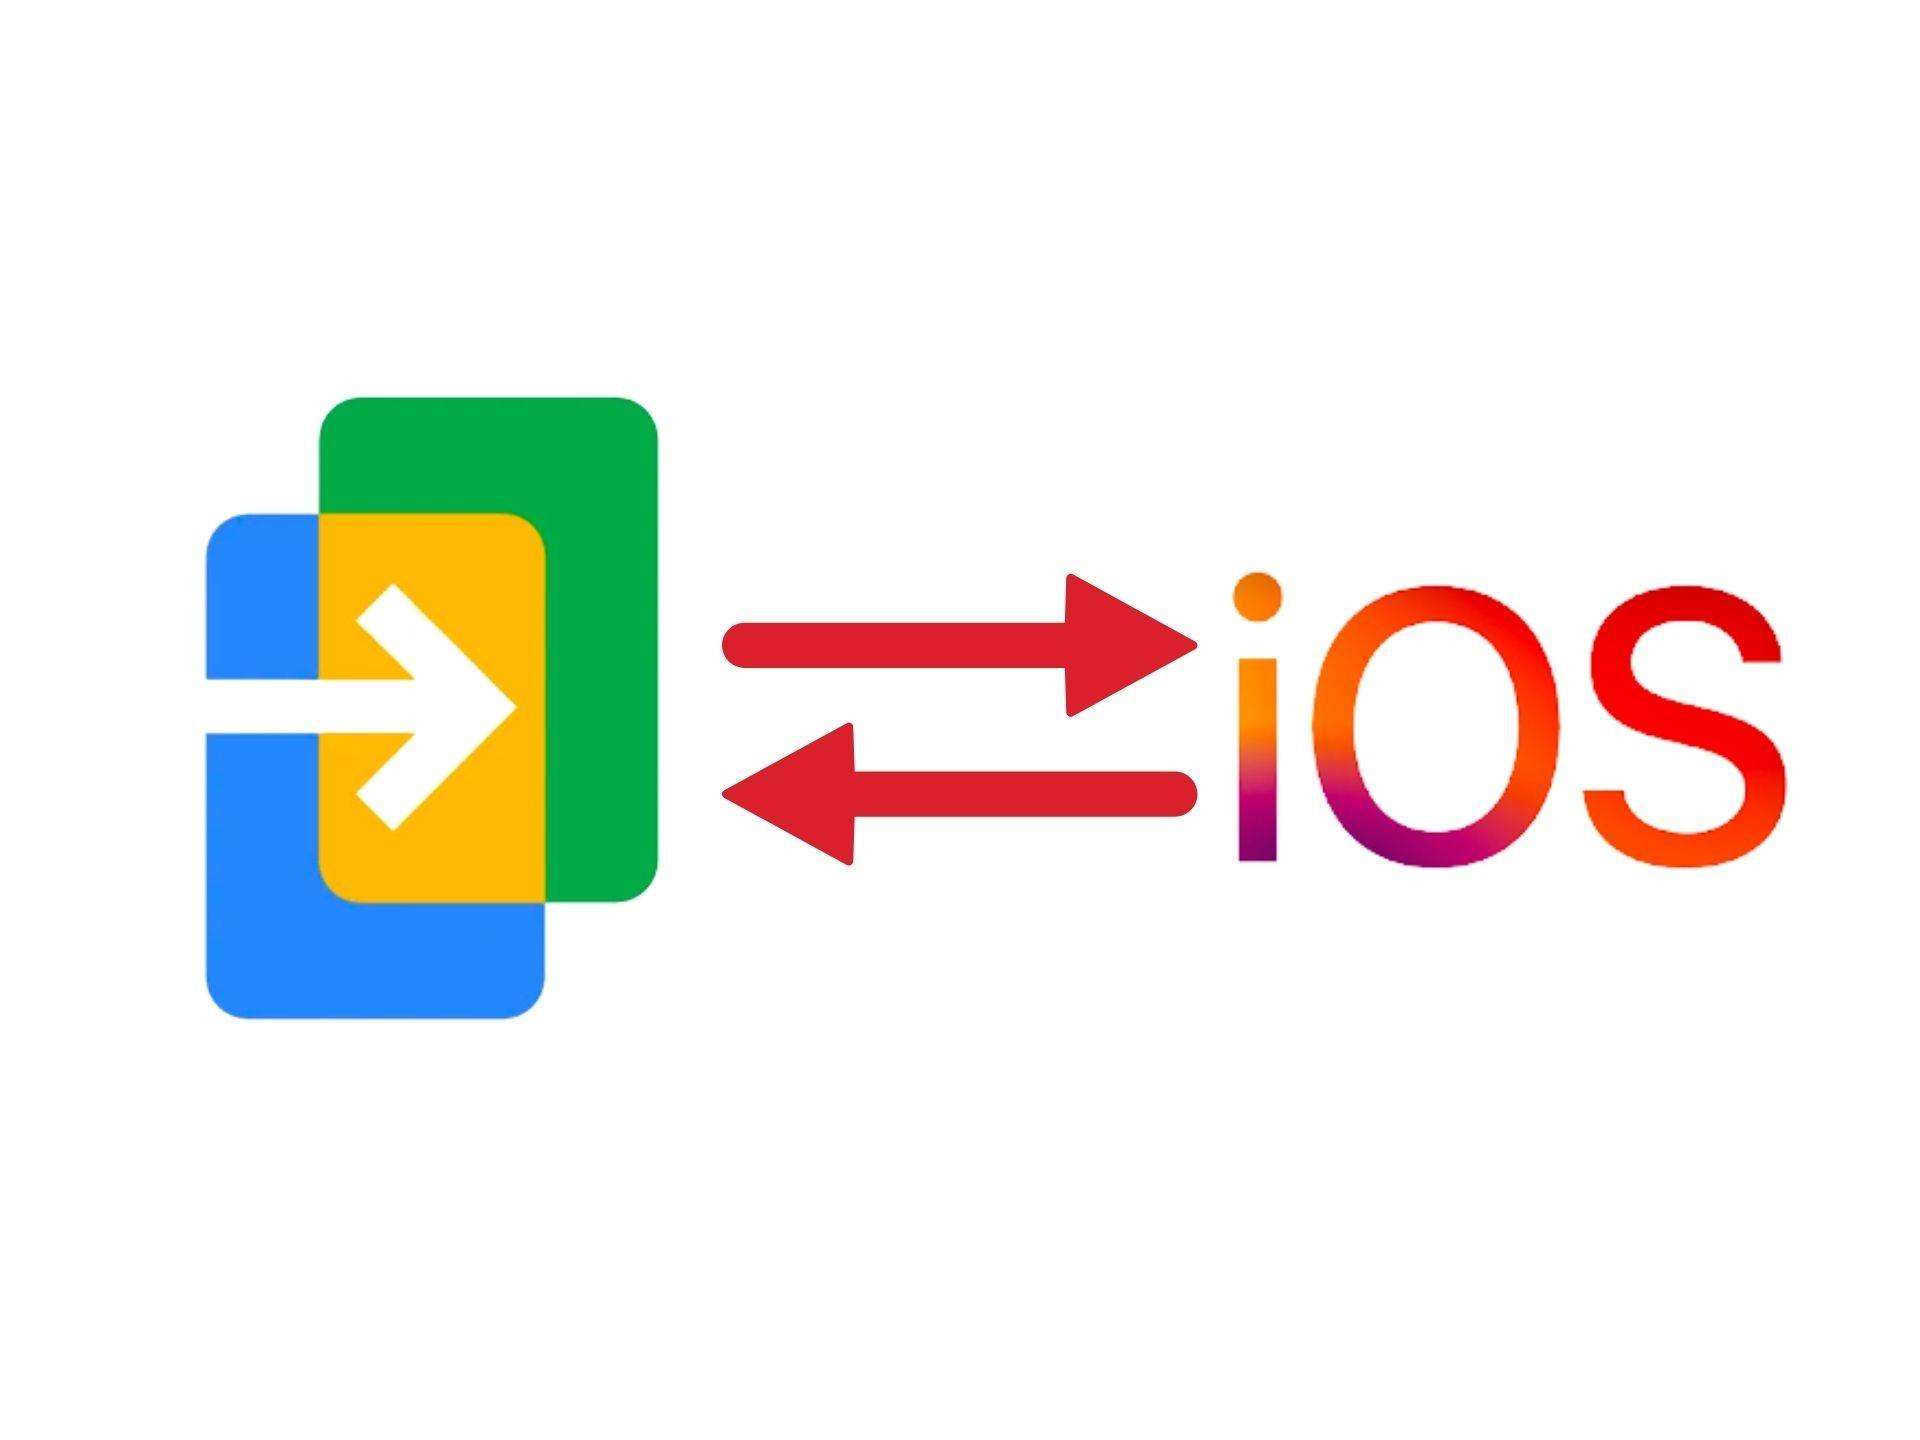 Switch to Android and Move to iOS